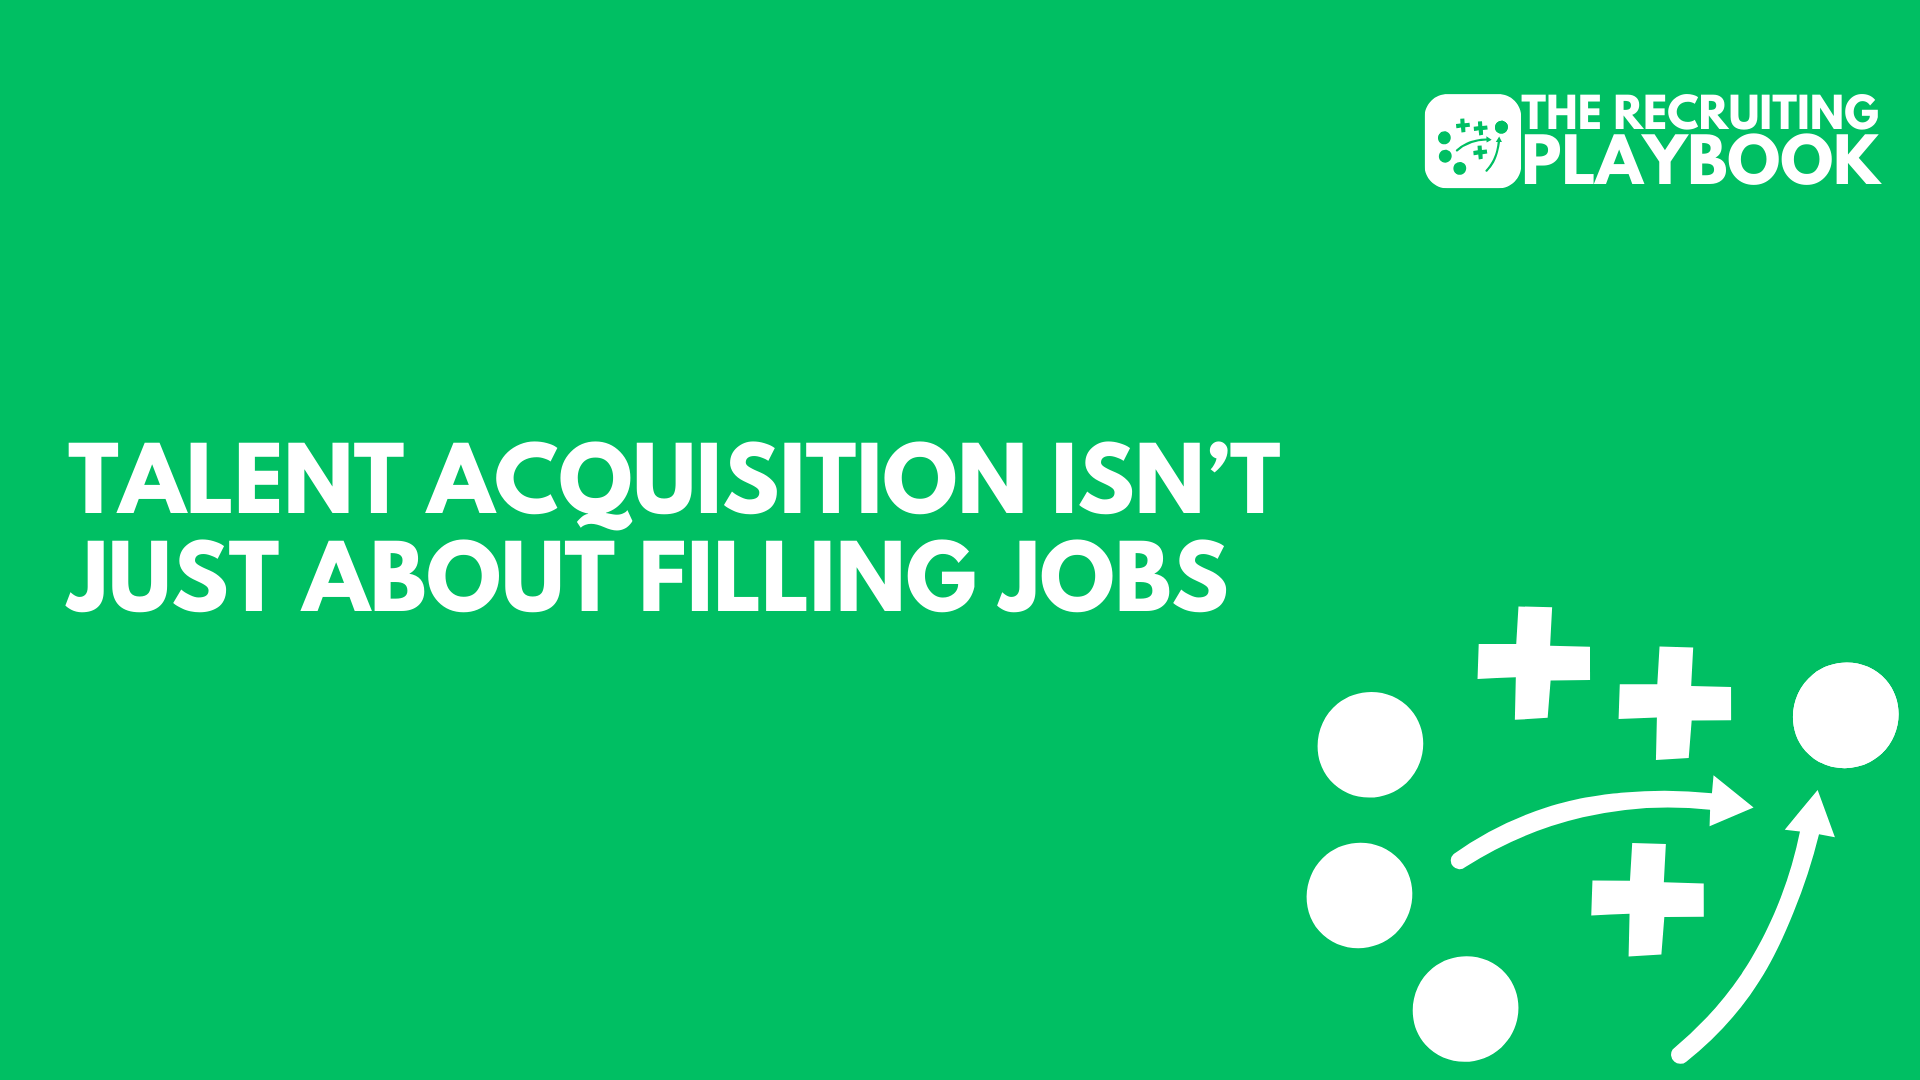 Talent Acquisition Isn't Just About Filling Jobs